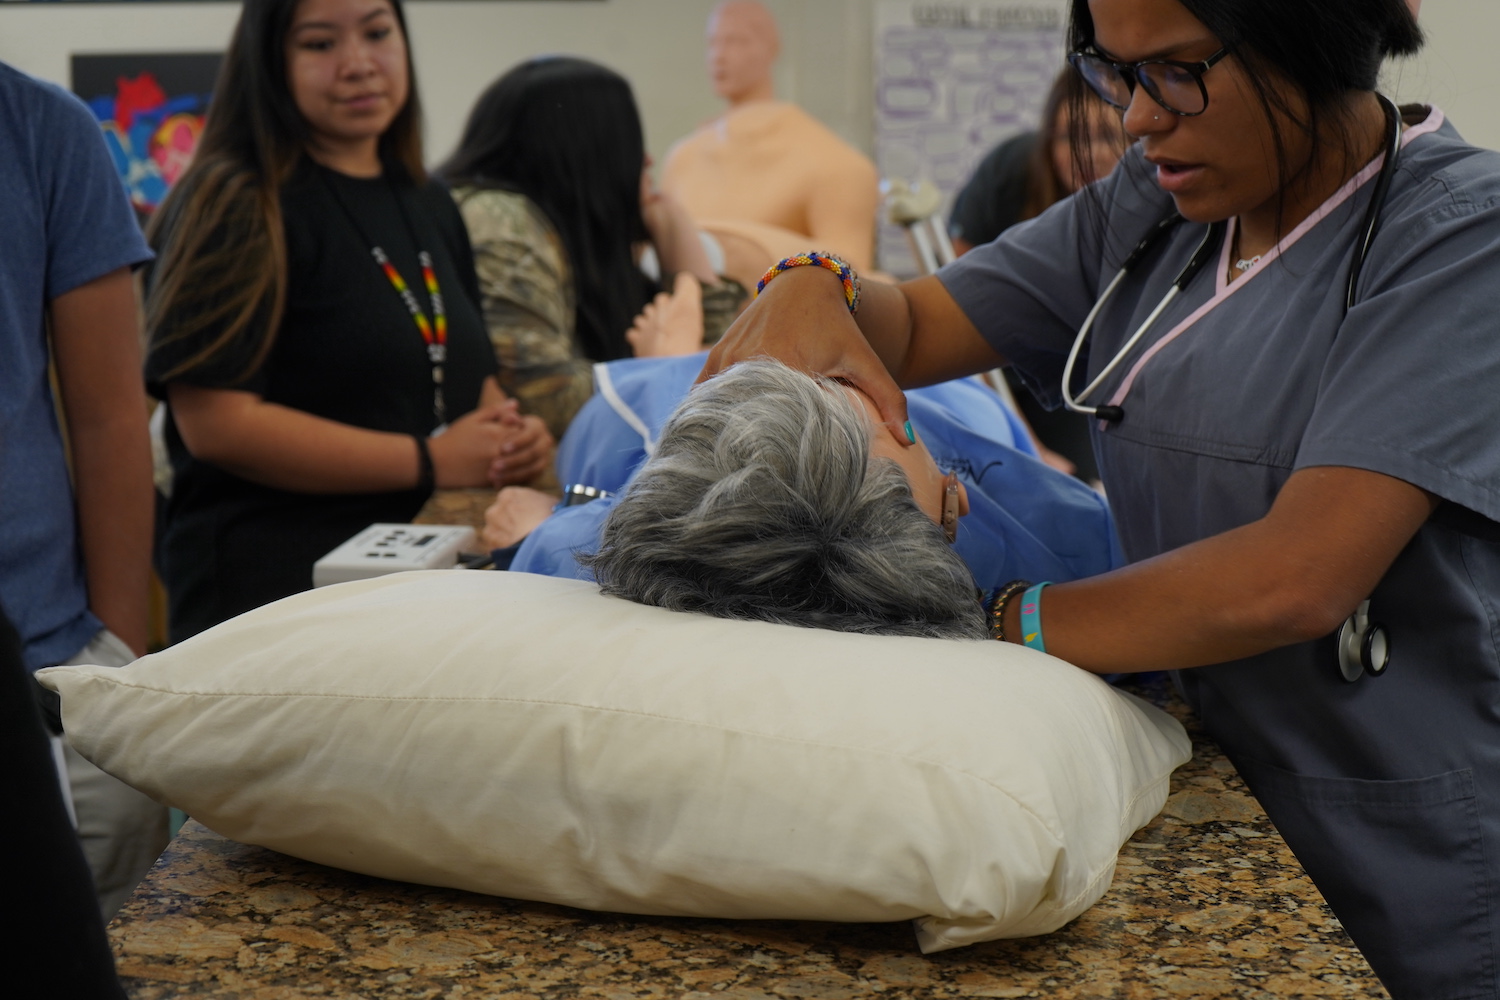 Students tending to a patient in bed